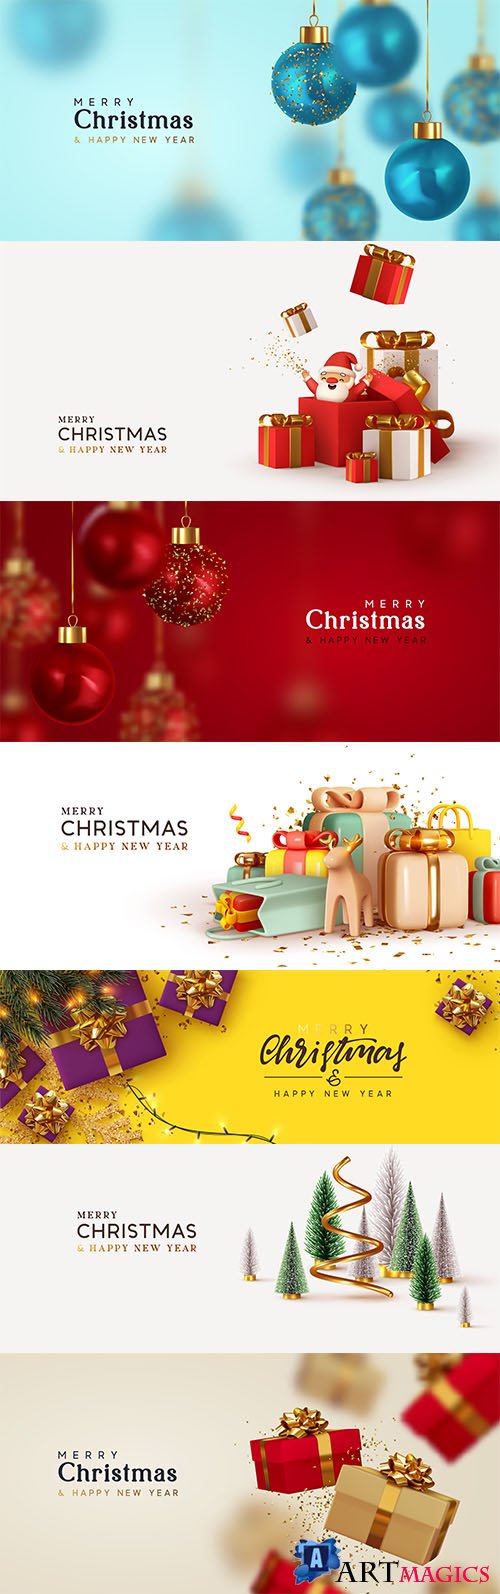 Happy new year and merry christmas background